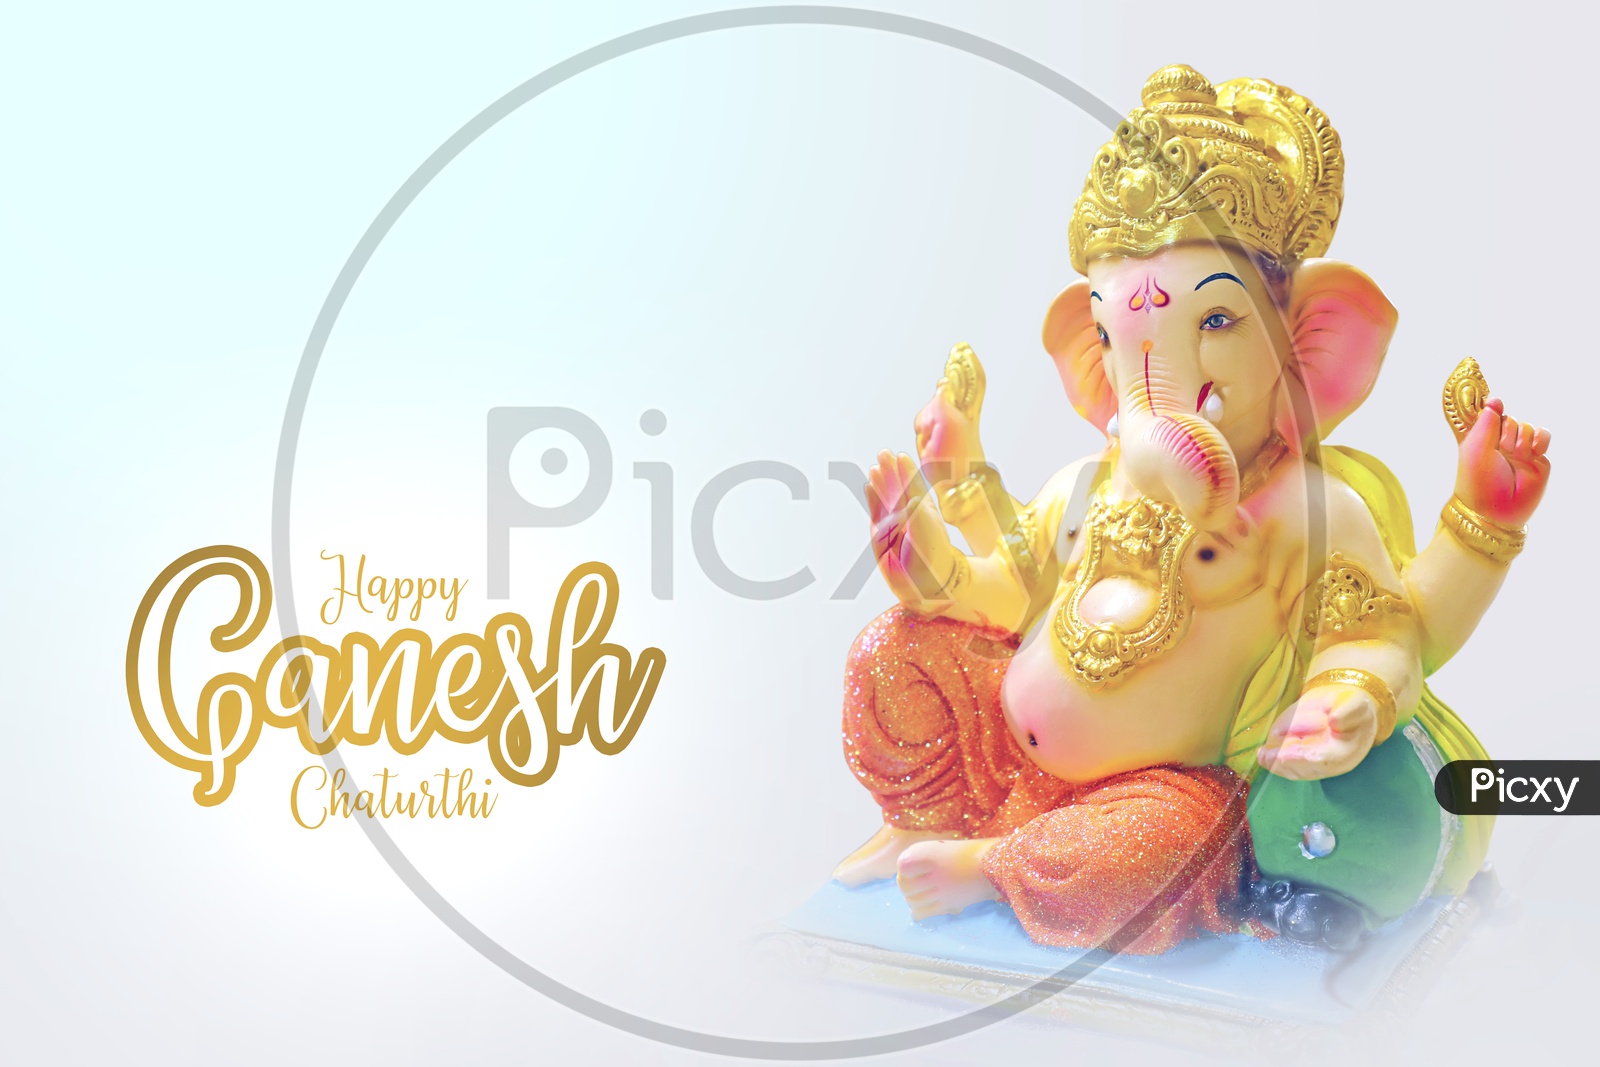 Happy Ganesh Charturthi Poster with Lord Ganesh Idol and  white background